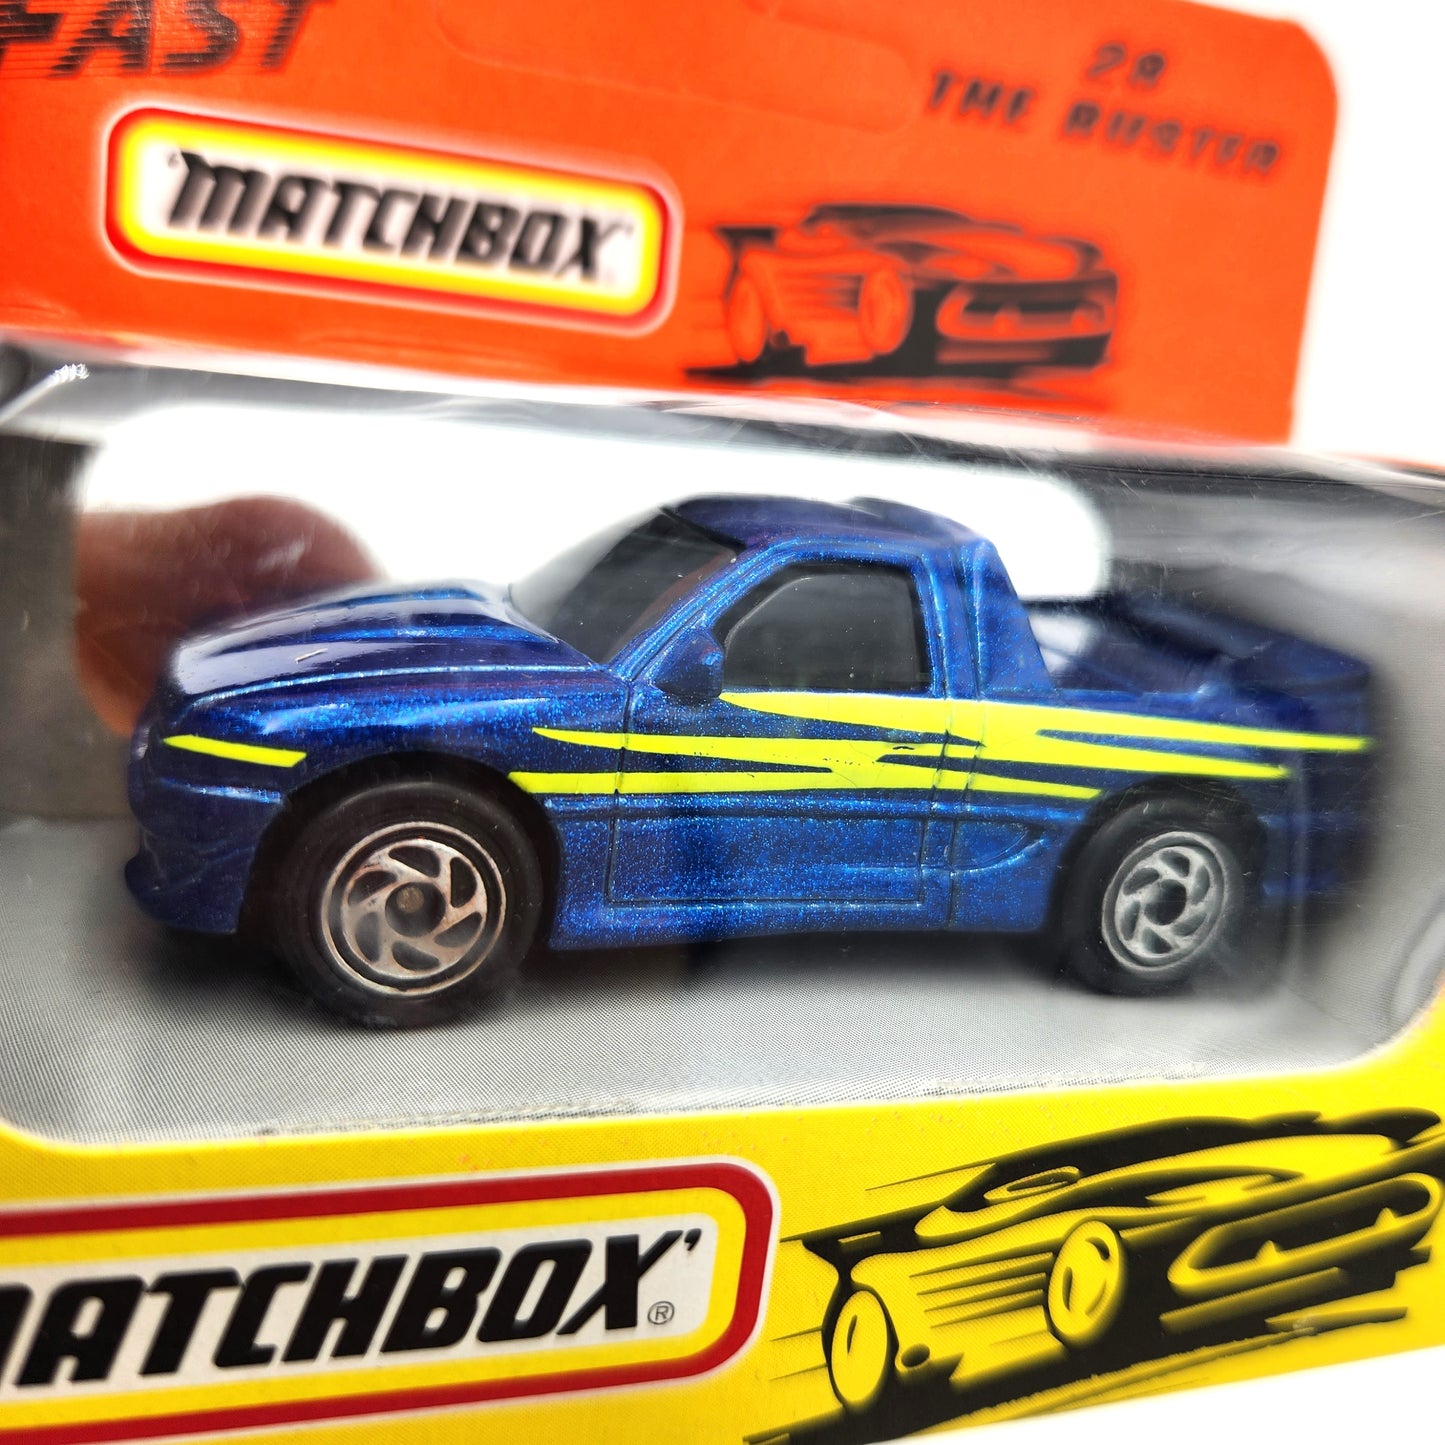 Matchbox - The Buster (Blue) #28 - 1:64 Scale